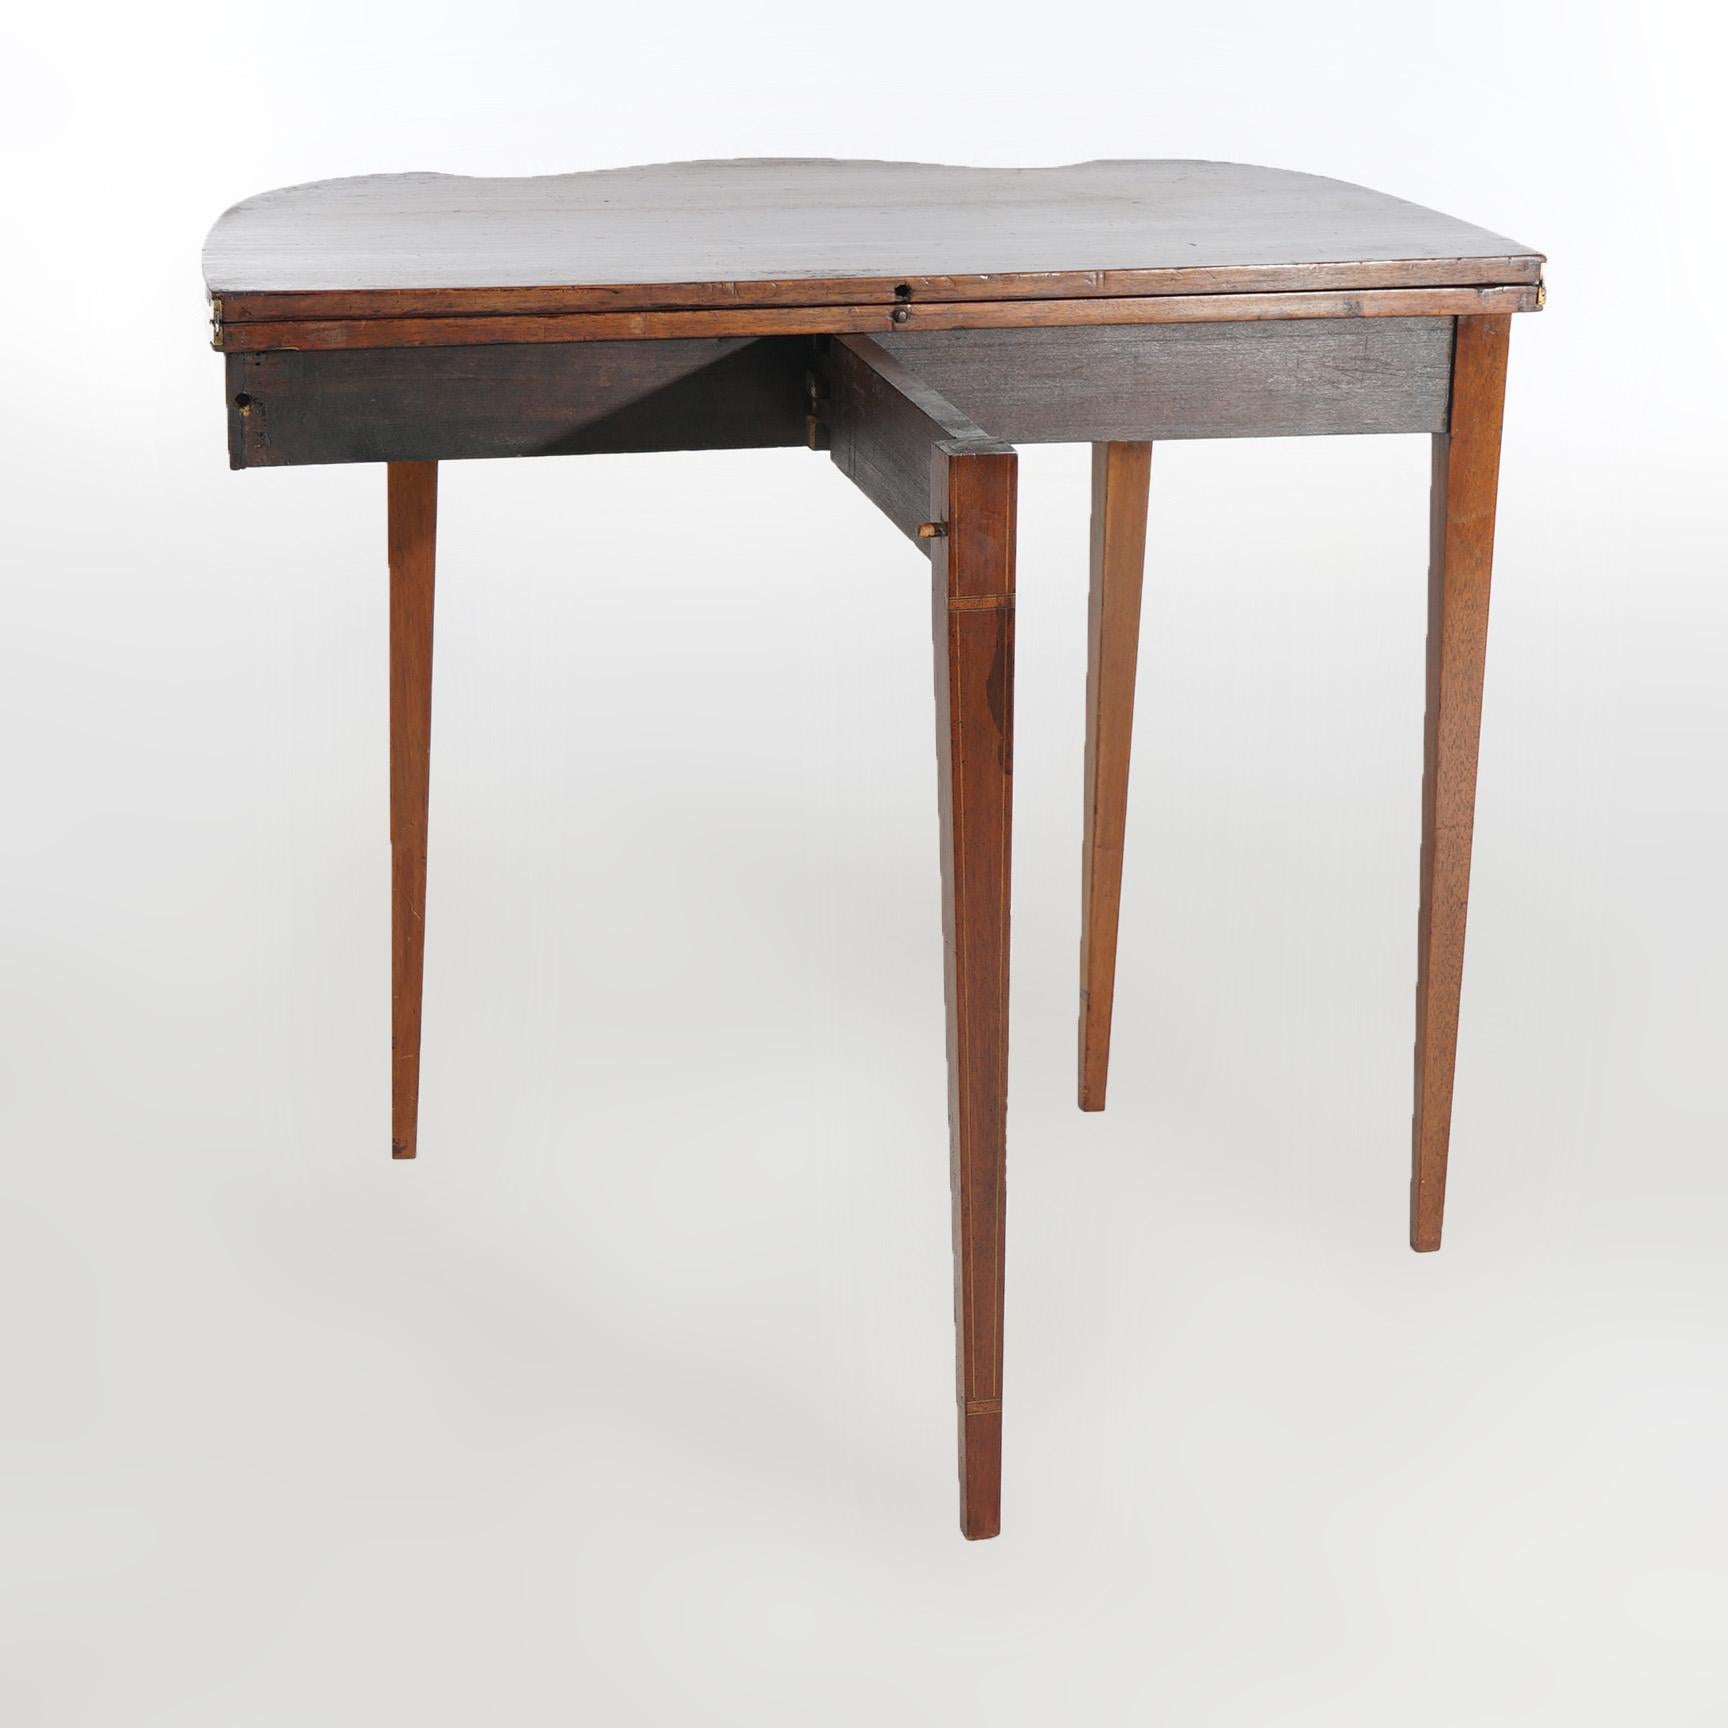 Federal Mahogany Swell Front Card Table, Bell Flower & Eagle Inlay, C1830 For Sale 9